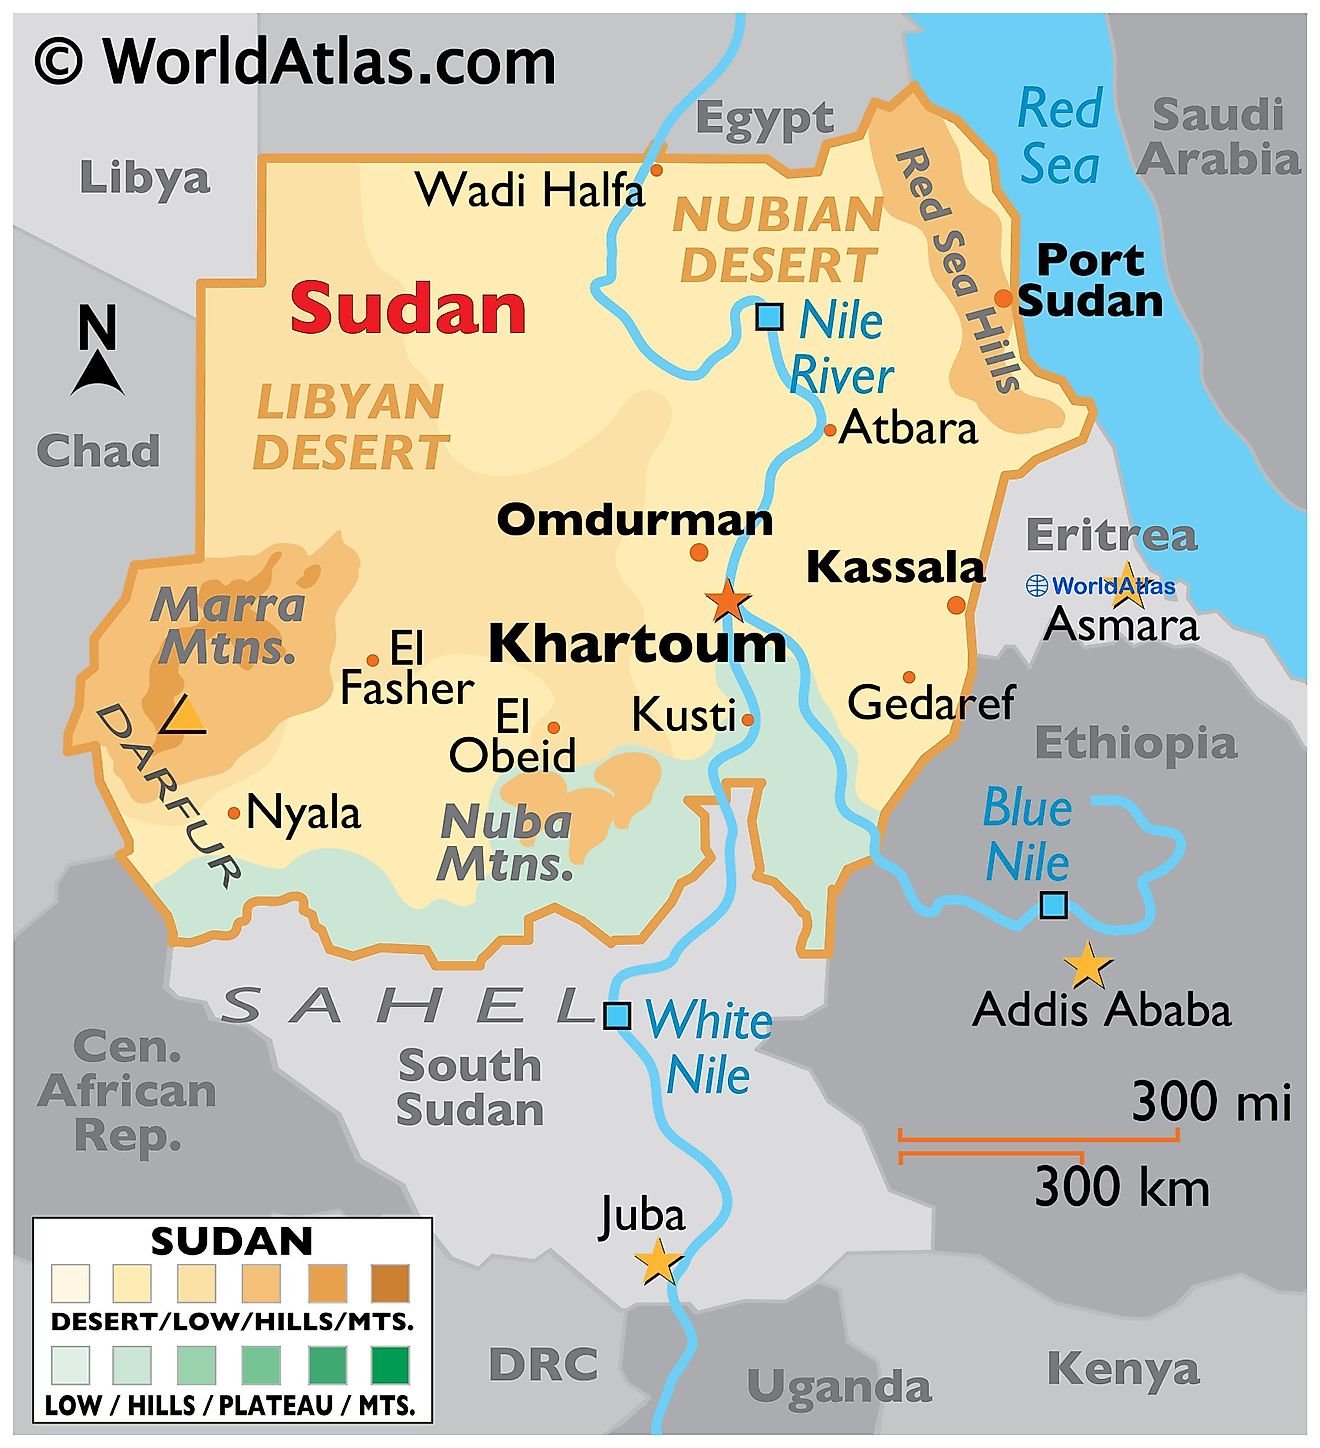 Phyiscal Map of the Sudan with state boundaries. It shows the physical features of Sudan including terrain, mountain ranges, plateaus, deserts, river systems, and major cities.